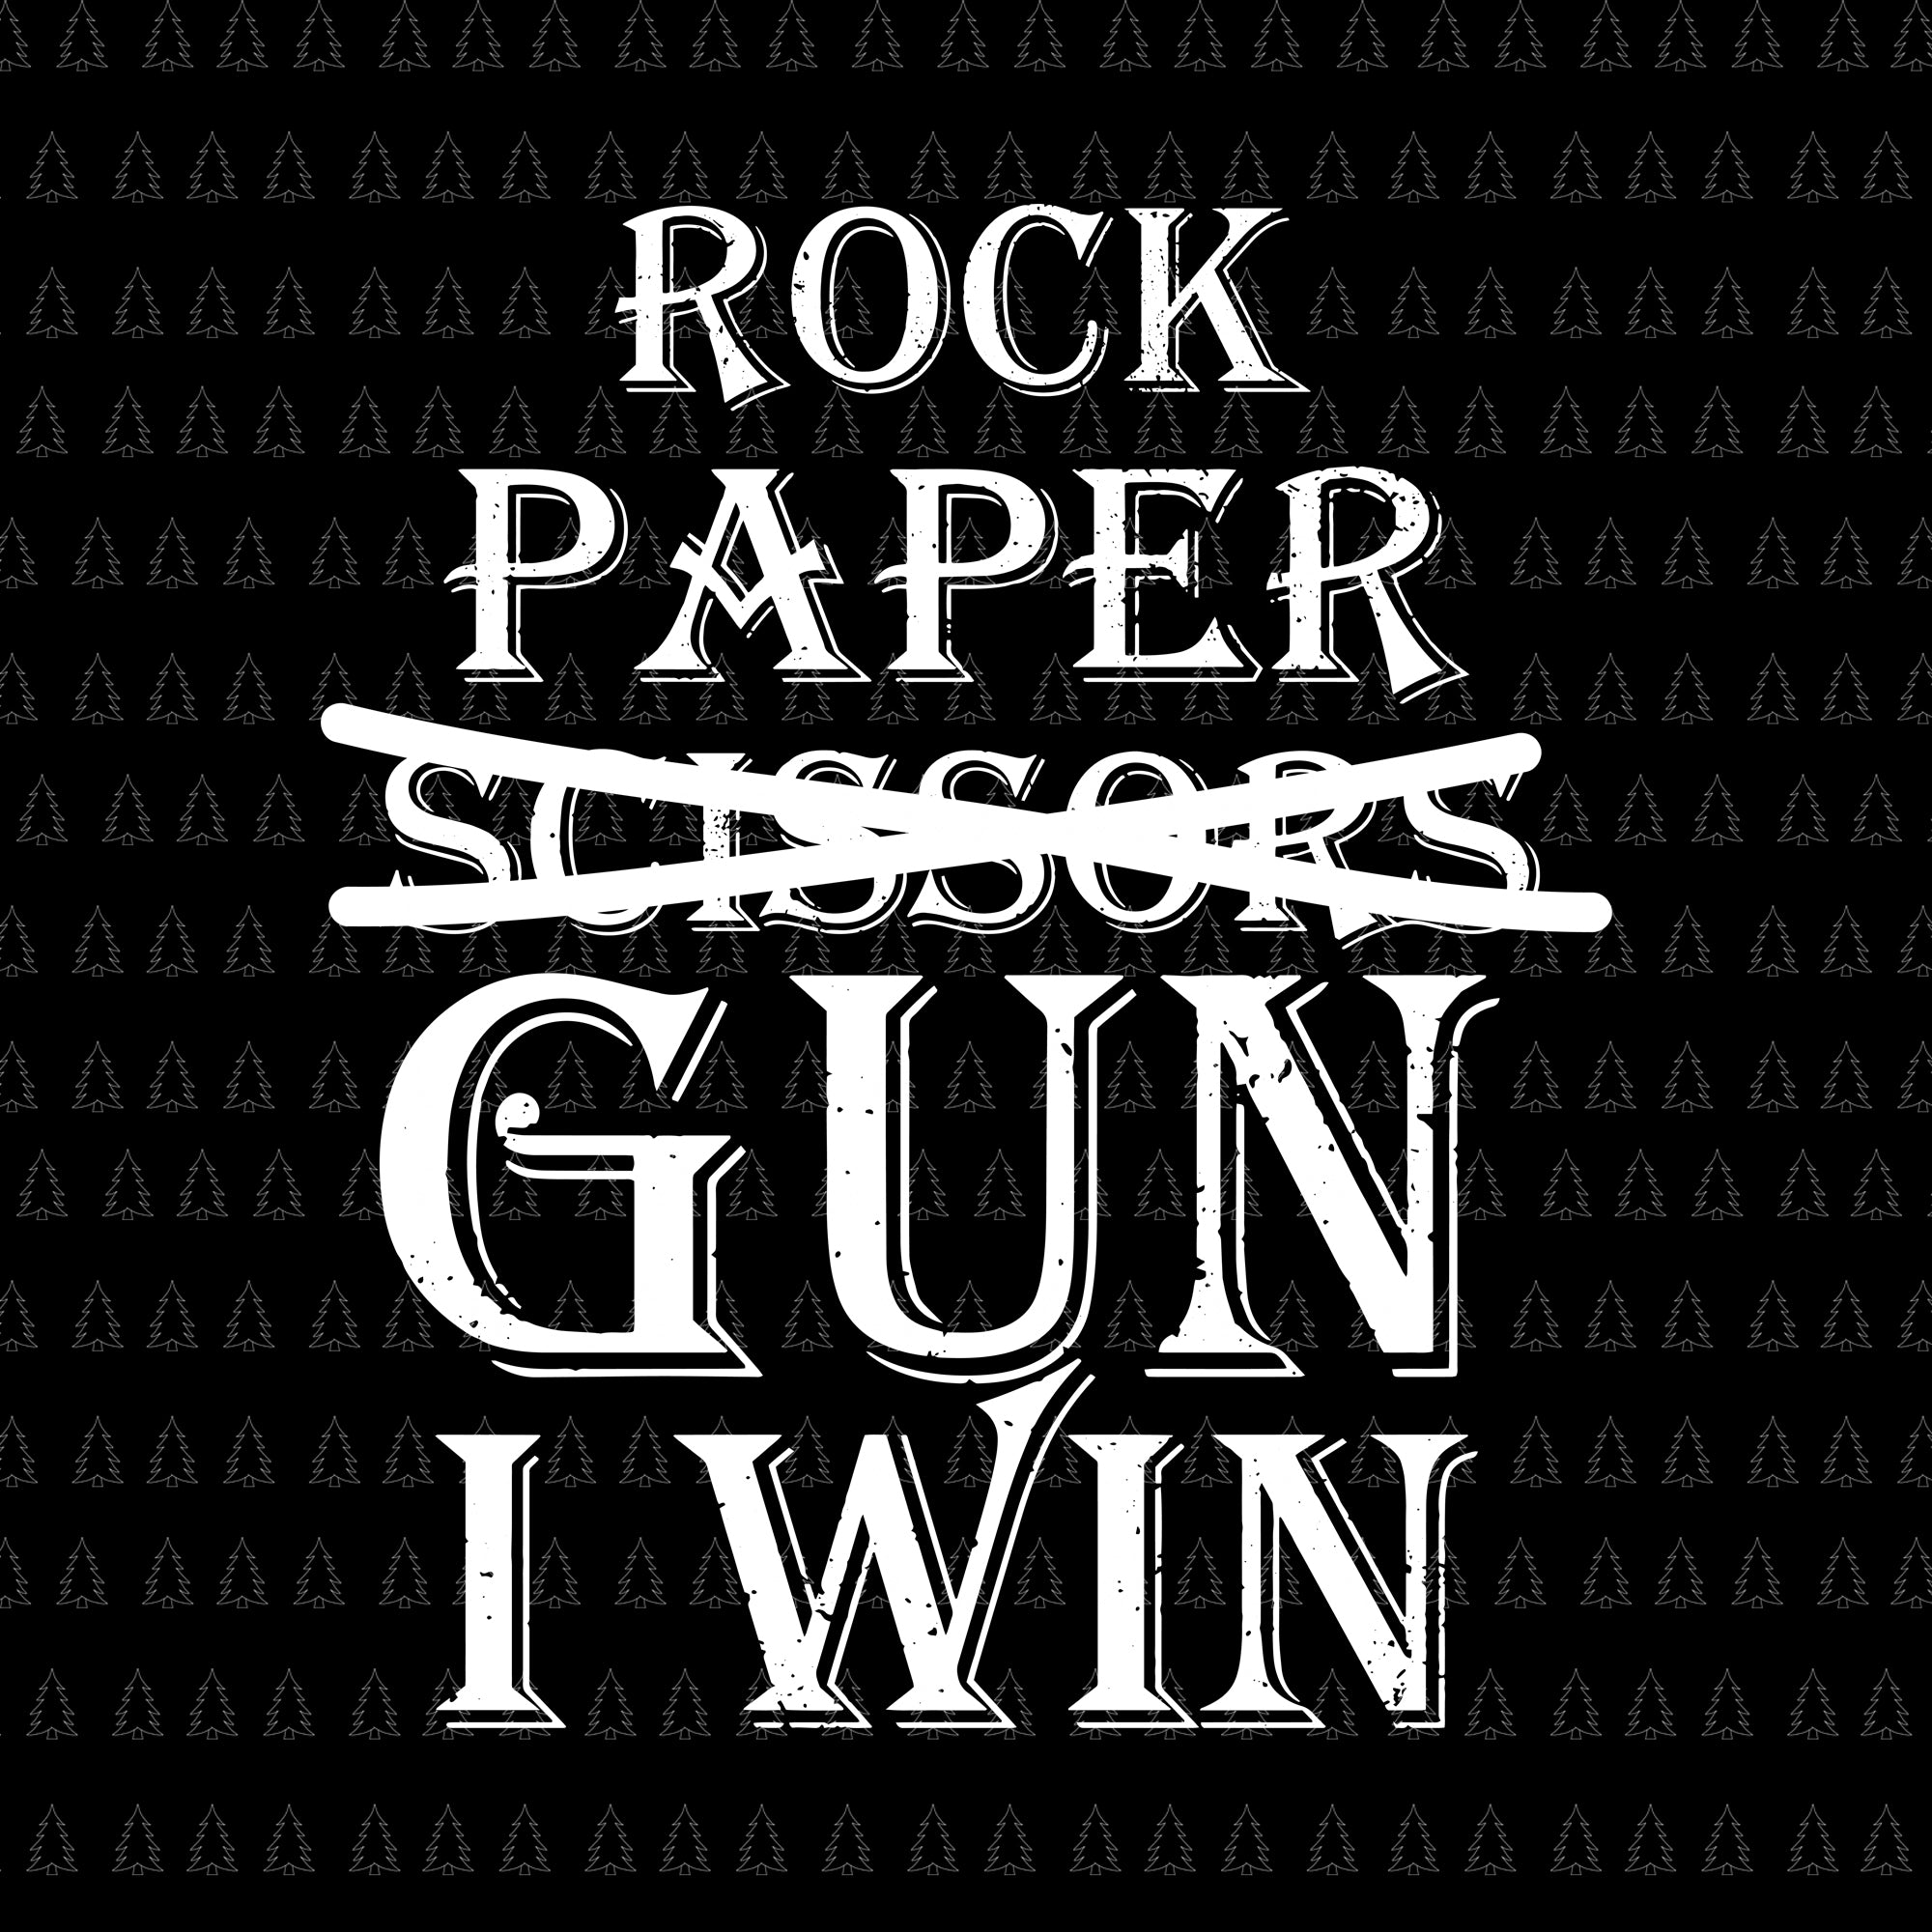 How to Win at Rock, Paper, Scissors